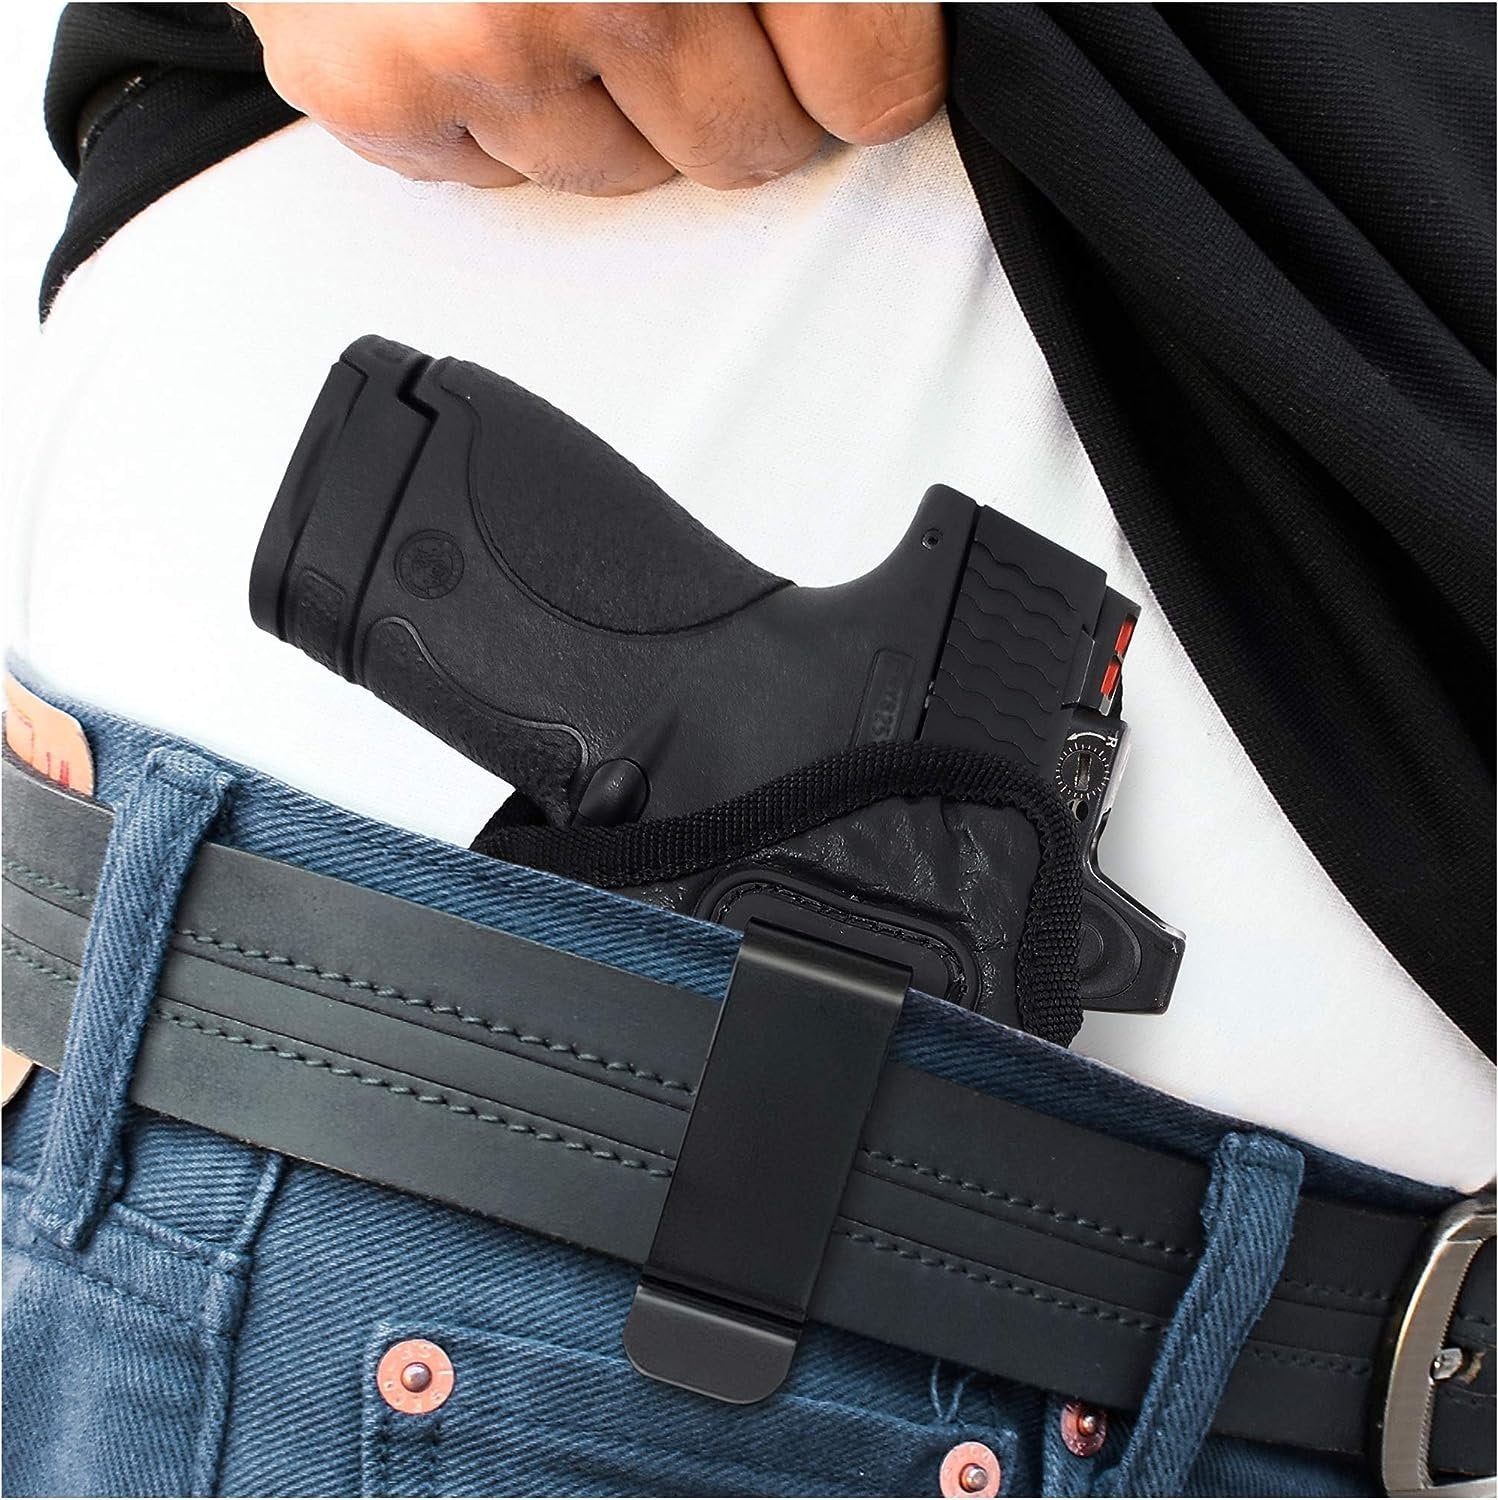 IWB Optical Gun Holster by Houston - ECO Leather Concealed Carry Soft